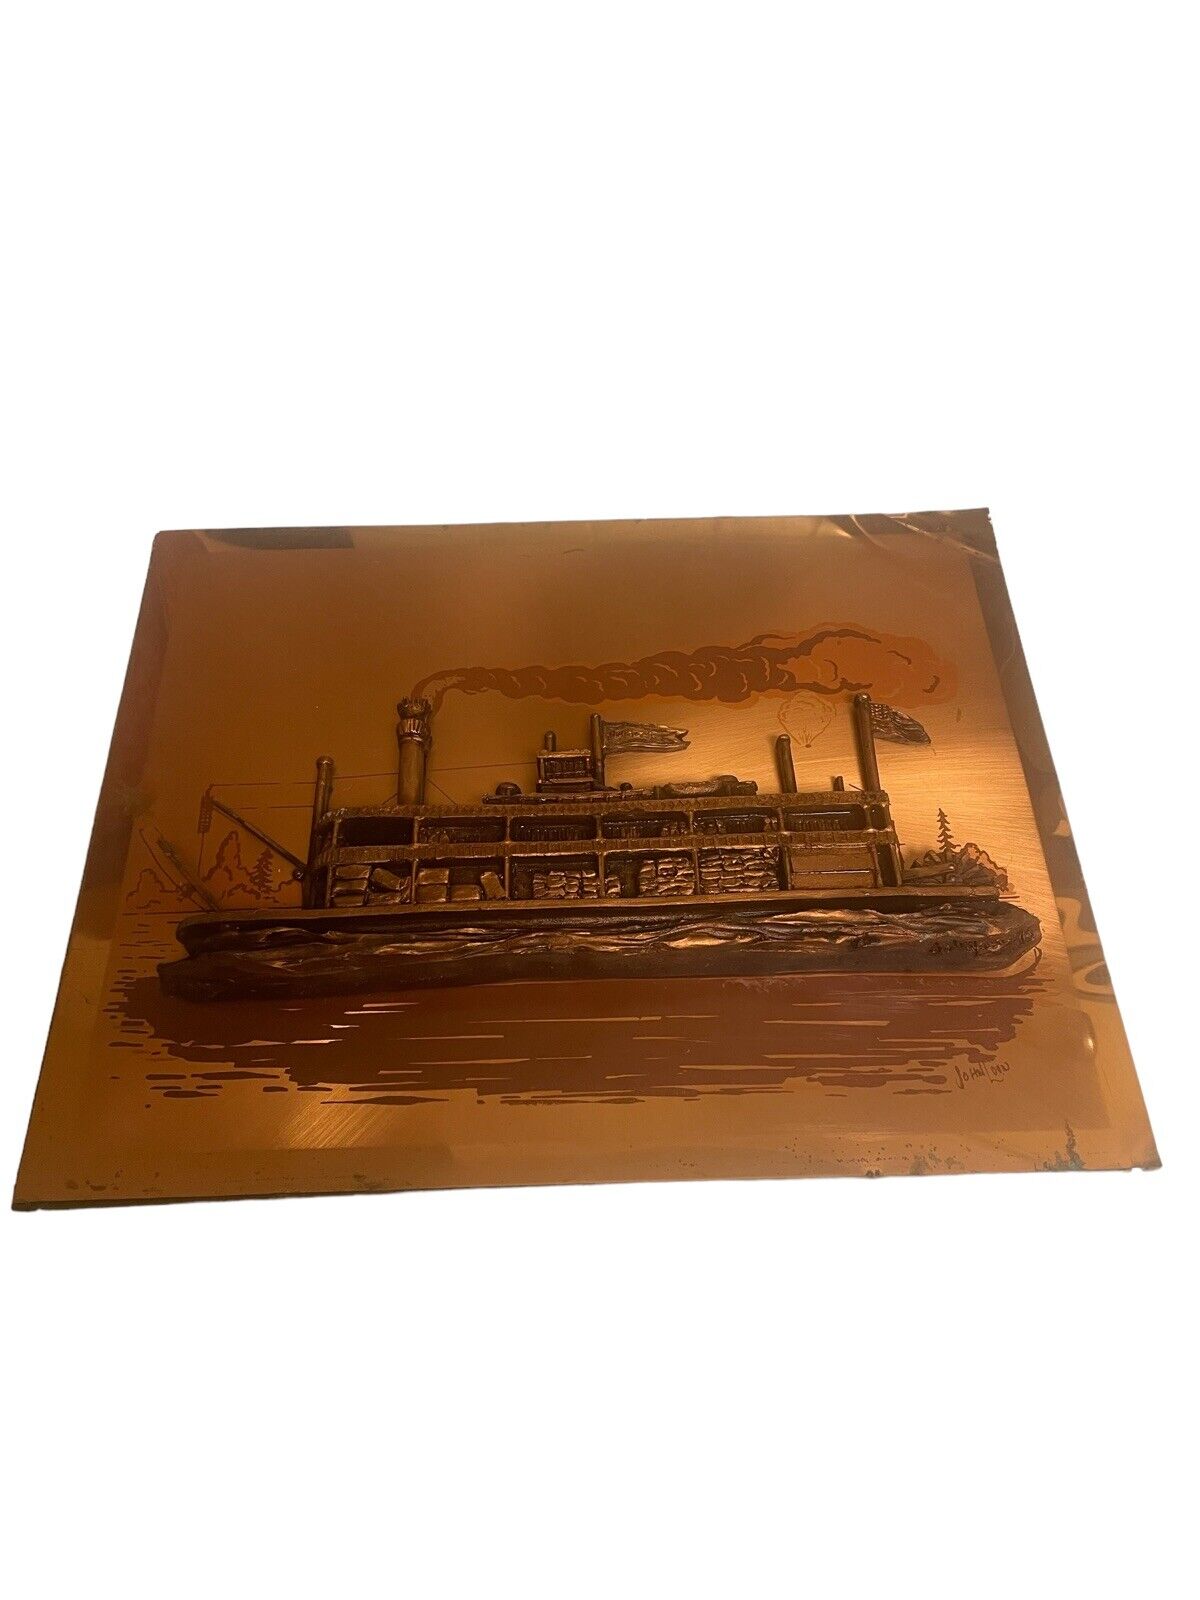 Steamboat Art Copper 3D   John Louw Distressed  Vintage Collectible